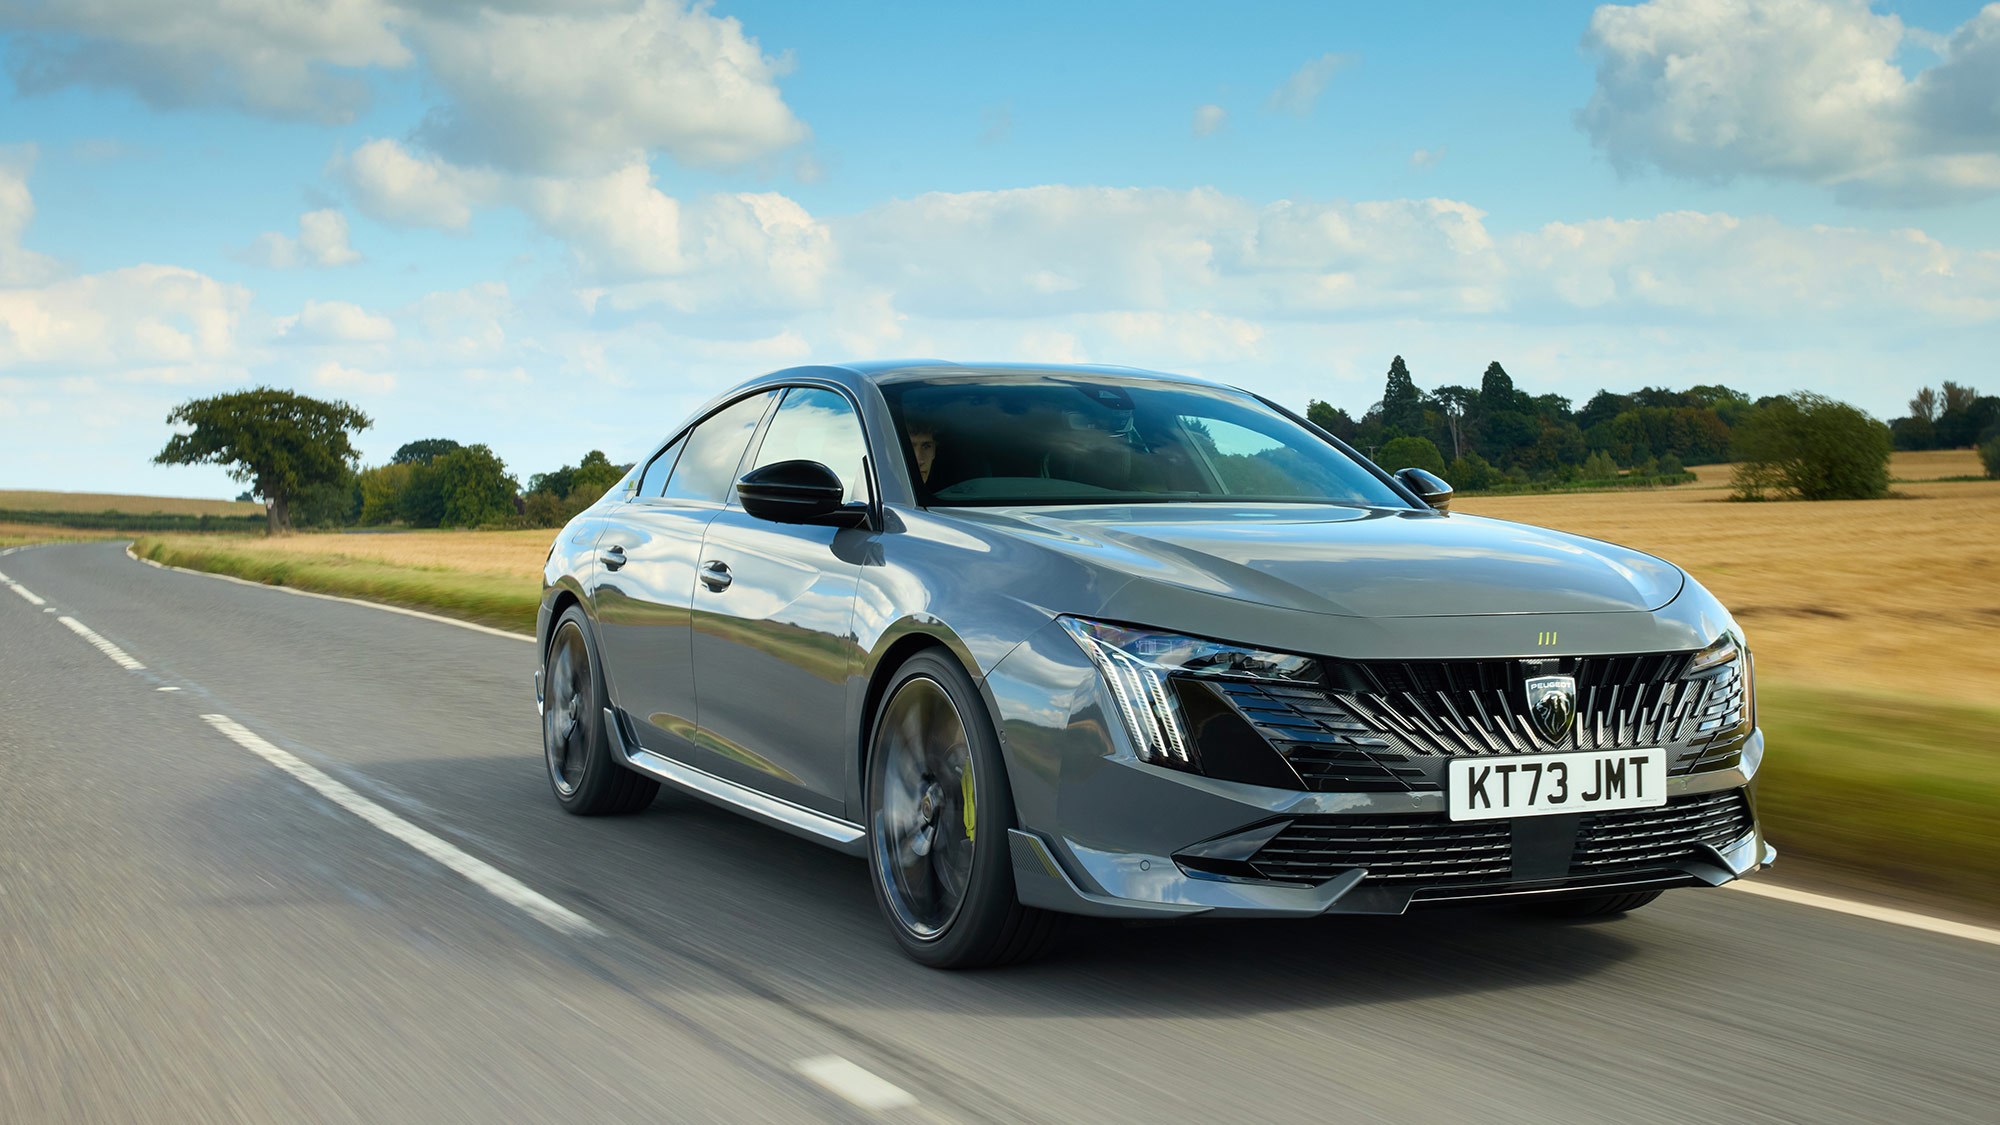 THE NEW 508, SEDAN, SW AND PEUGEOT SPORT ENGINEERED: THE NEW FACE